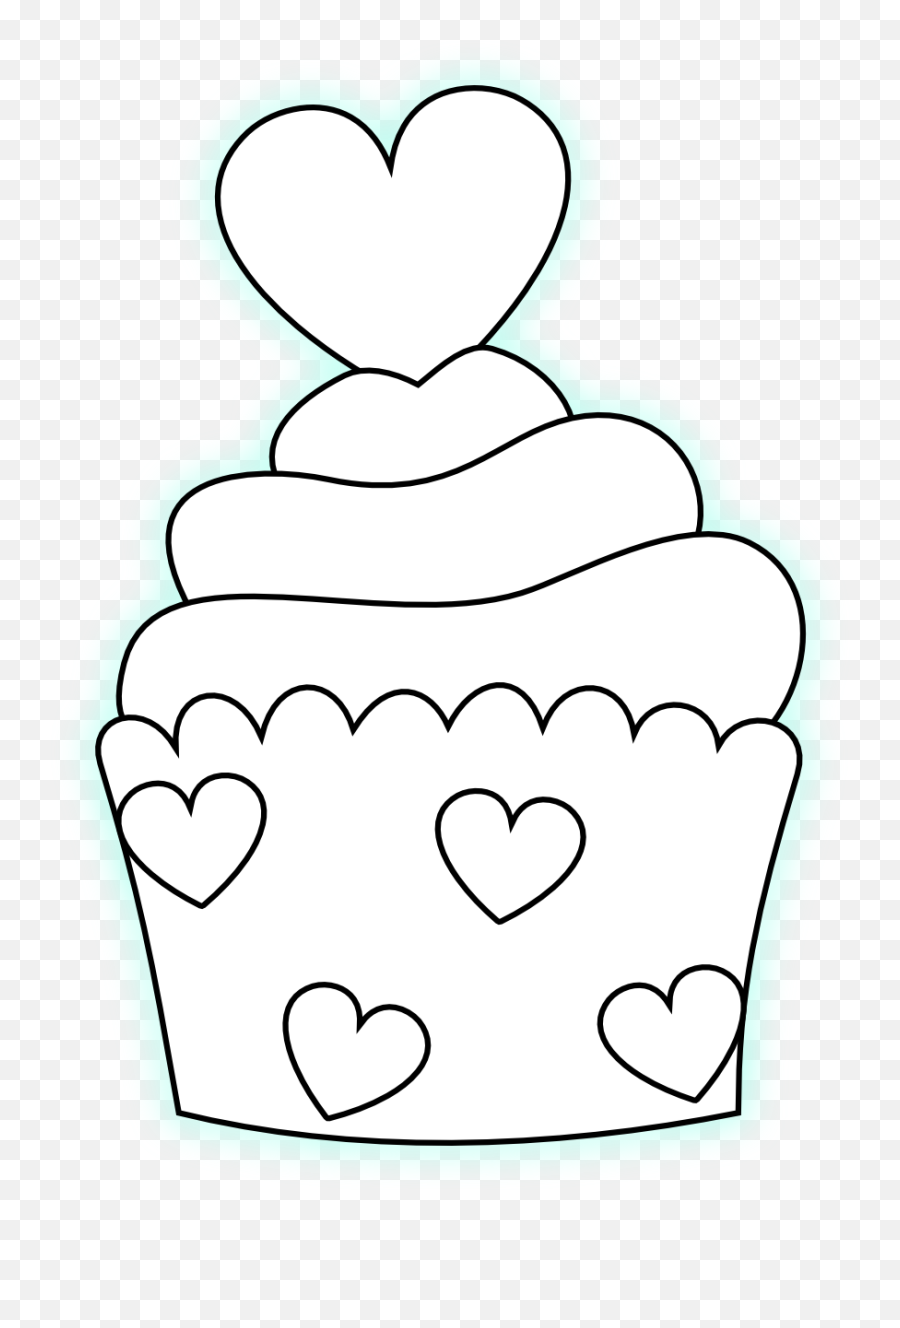 Cupcake Drawing Applique Templates Embroidery Patterns Emoji,Emoji Embroidery Designs